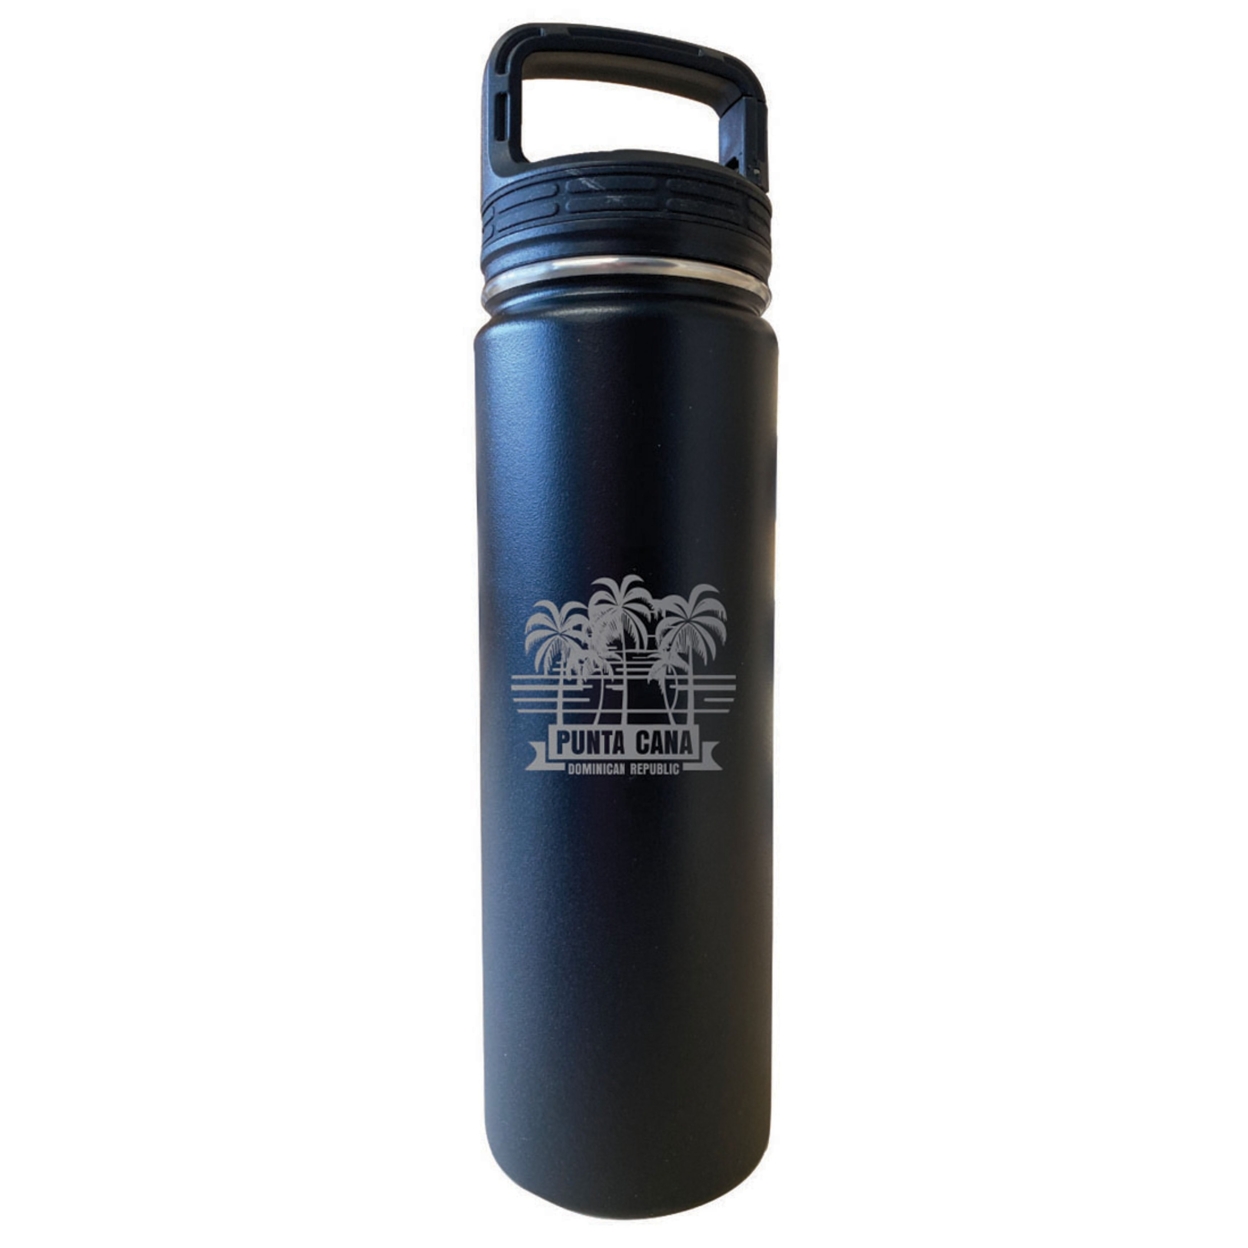 Punta Cana Dominican Republic Souvenir 32 Oz Insulated Stainless Steel Tumbler - Black, Palm 2